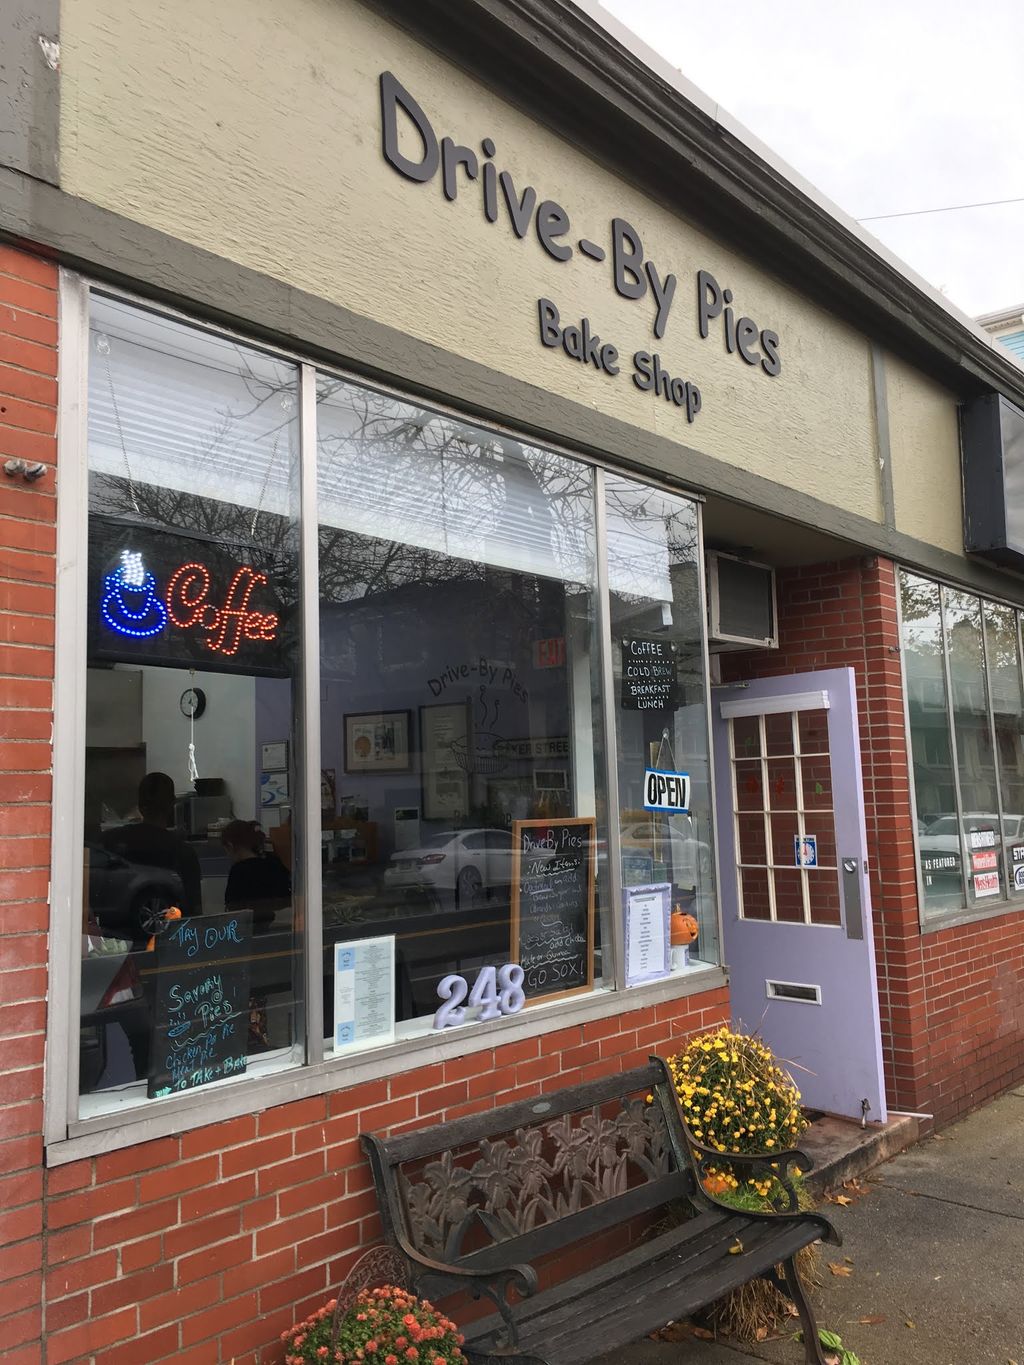 Drive-By-Pies